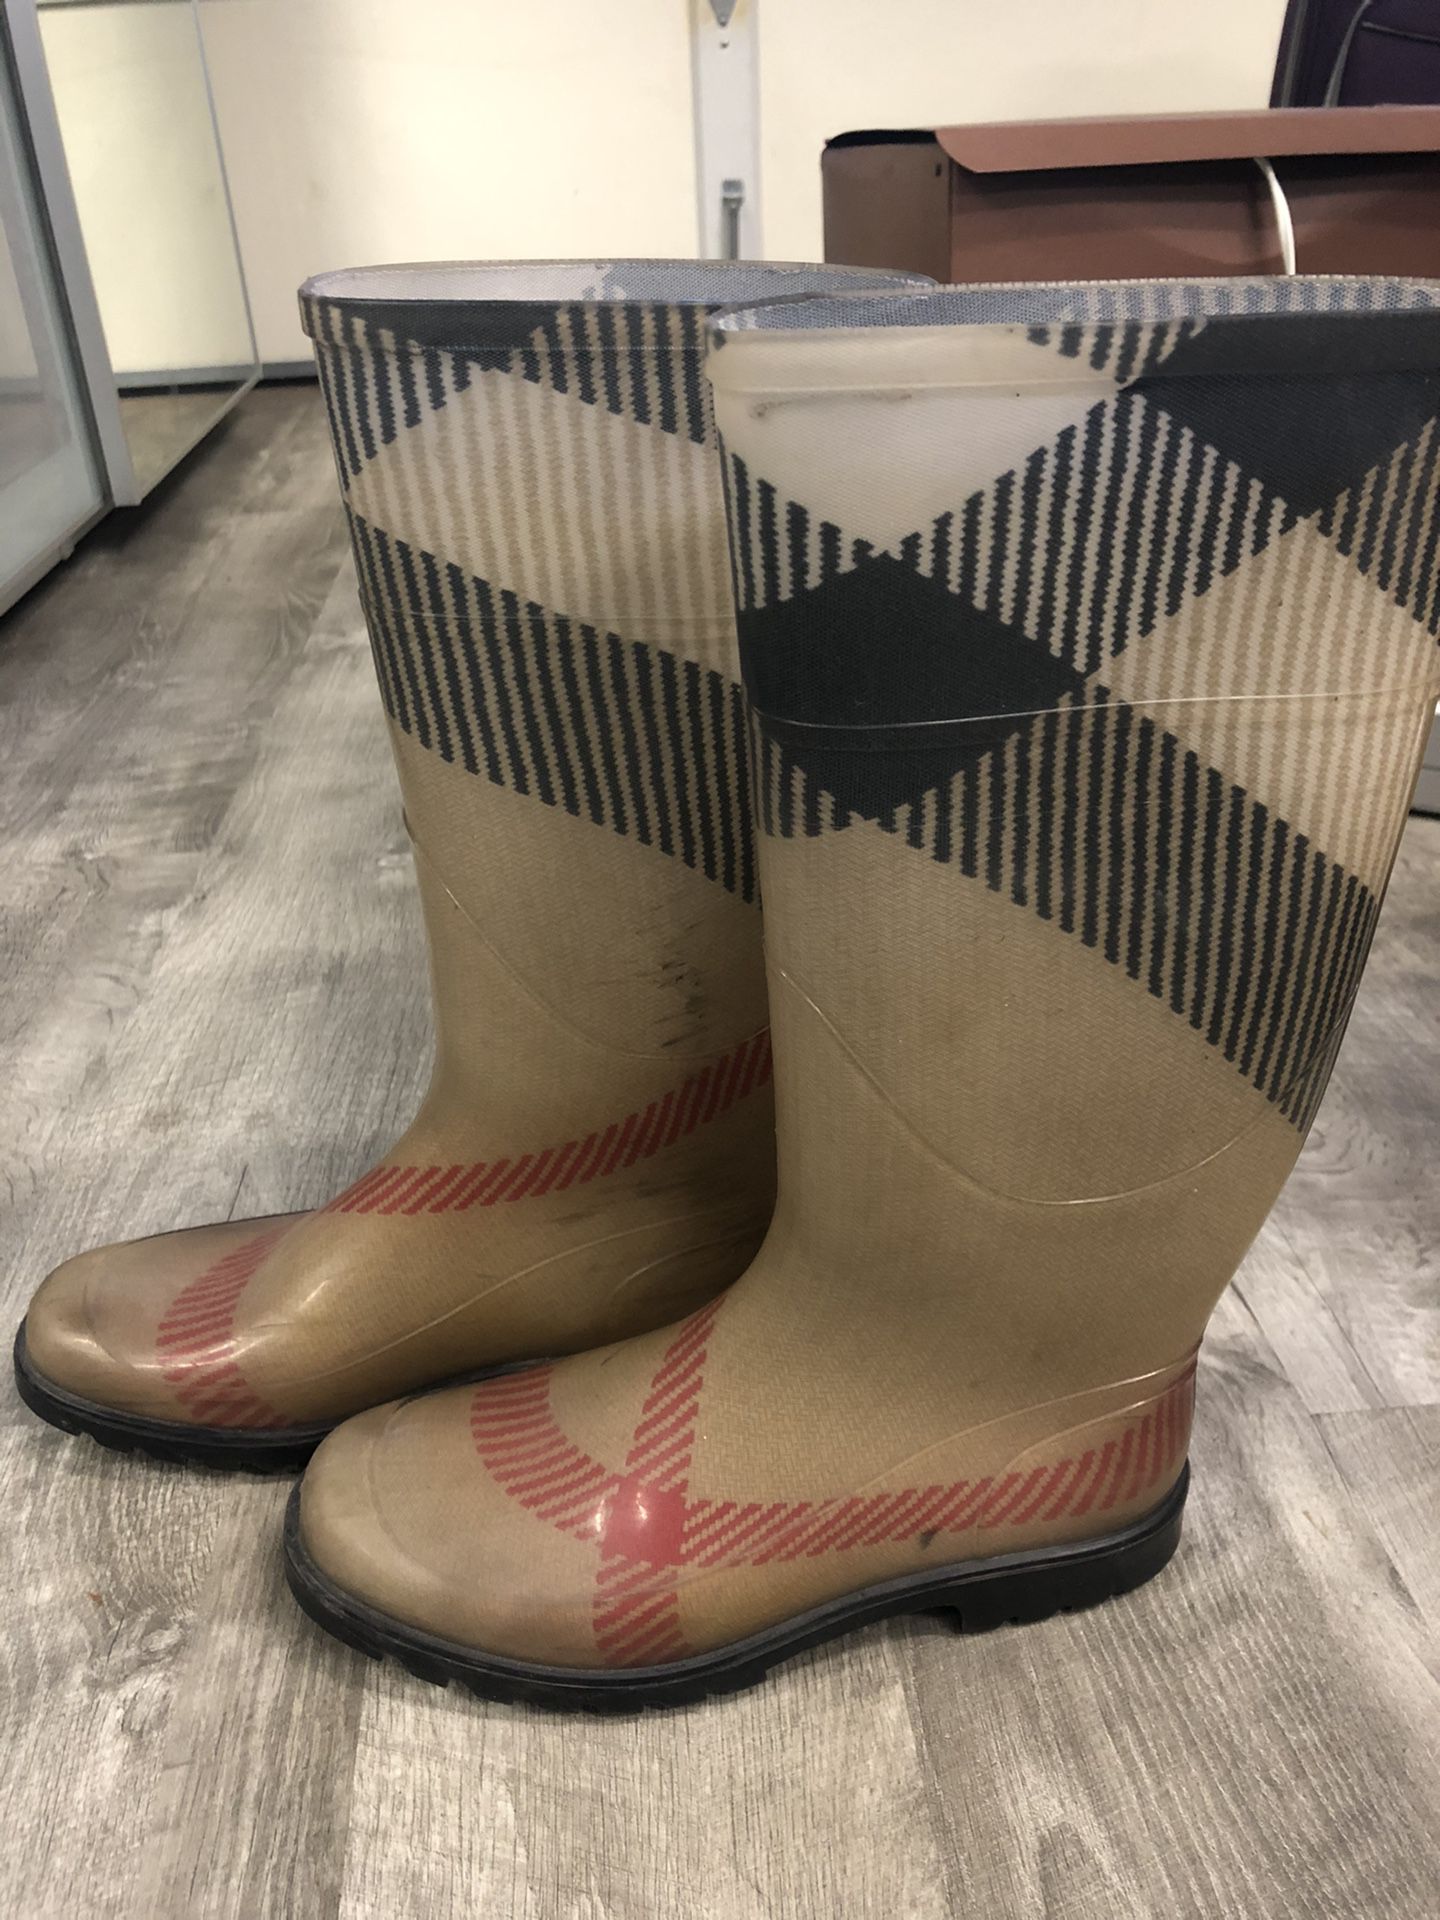 Authentic Burberry boots size 38